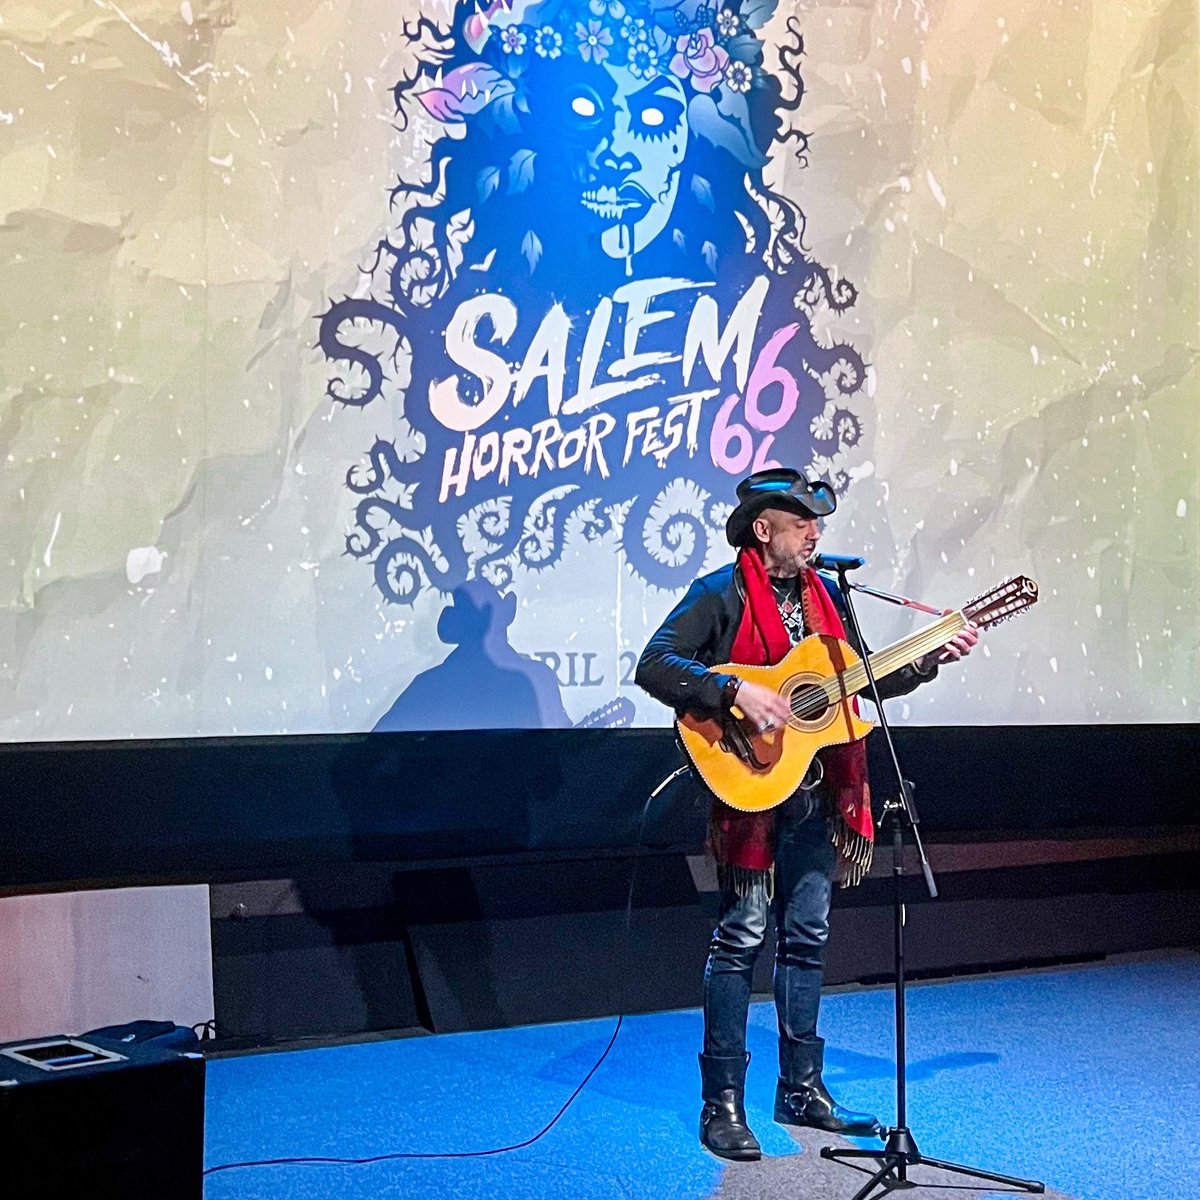 Tim Eriksen performing “How Come That Blood” in Salem, Massachusetts at the @CinemaSalem advance screening.